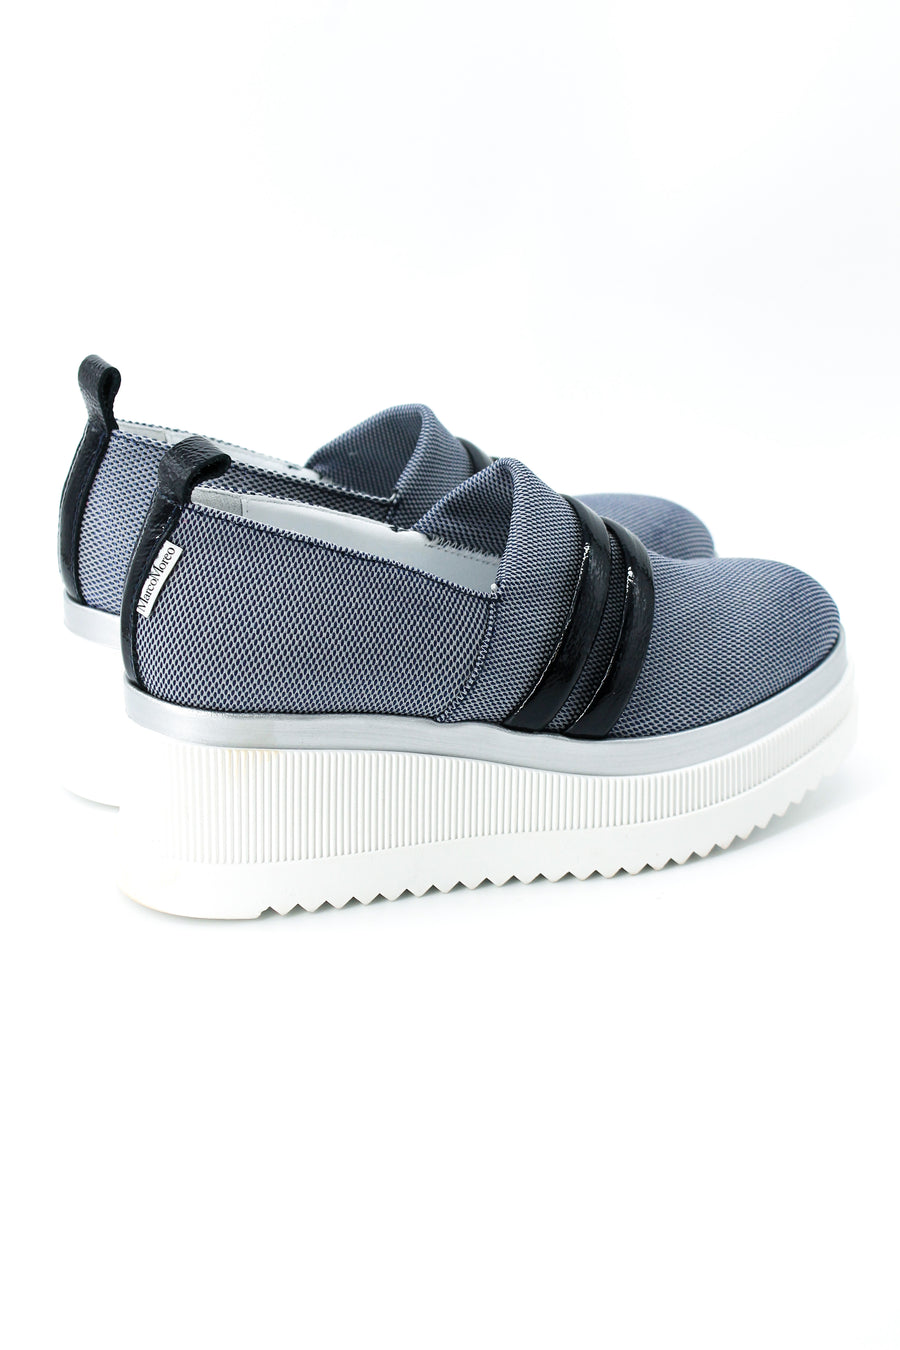 Marco Moreo 3040 Navy and White